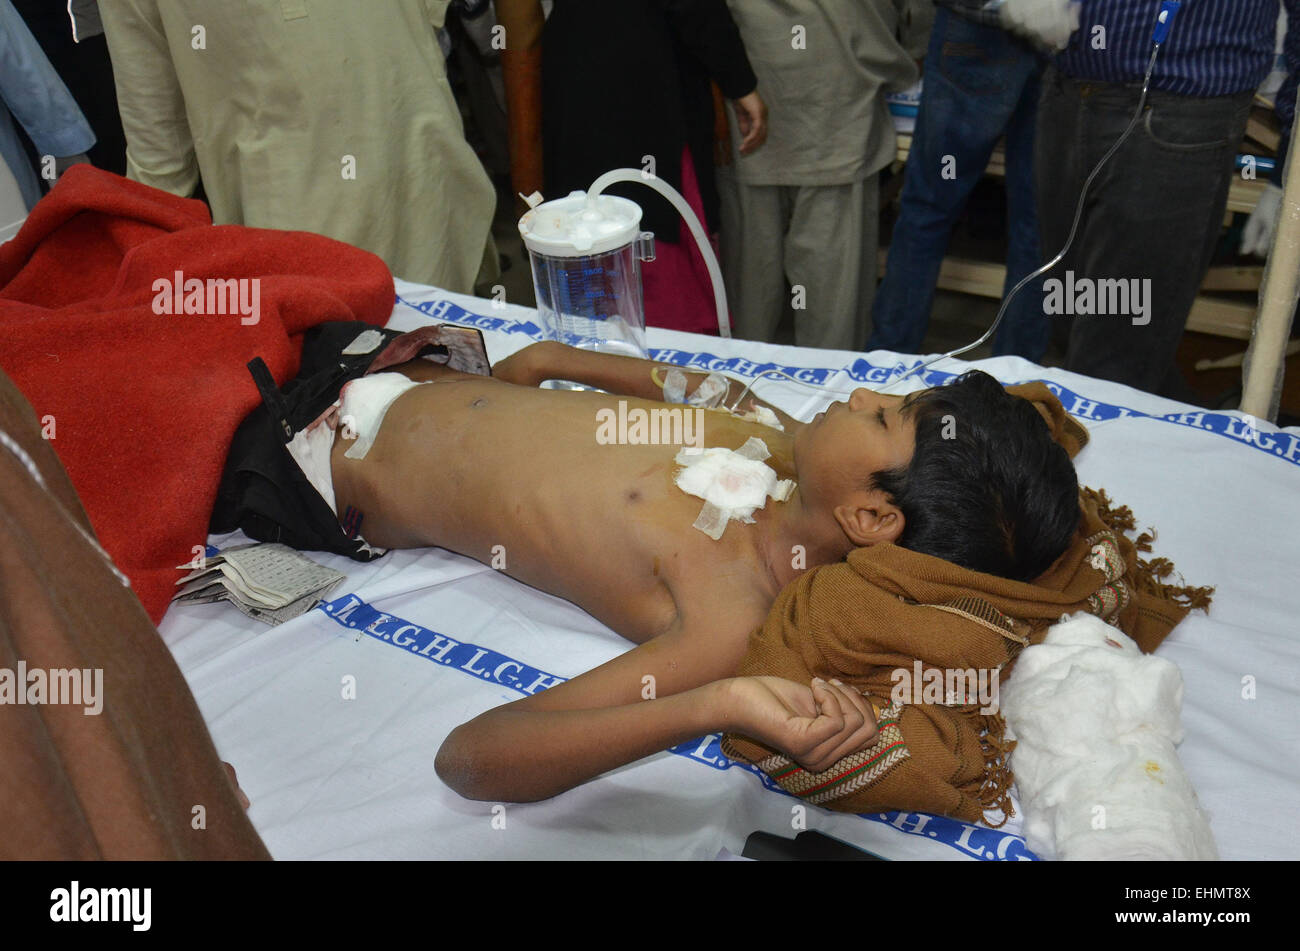 Lahore, Pakistan. 15th March, 2015. Victims brought in the hospital. The mob called suspects in aiding the suicide bombers nearby the scene of an attack on a church in Lahore, Pakistan, 15 March 2015. Two Taliban suicide bombers blew themselves up outside two churches in the impoverished Yohana Abad sector of eastern Lahore during Sunday mass, killing at least 11 worshipers and wounding several others, officials said, in the latest attack against religious minorities. Credit:  PACIFIC PRESS/Alamy Live News Stock Photo